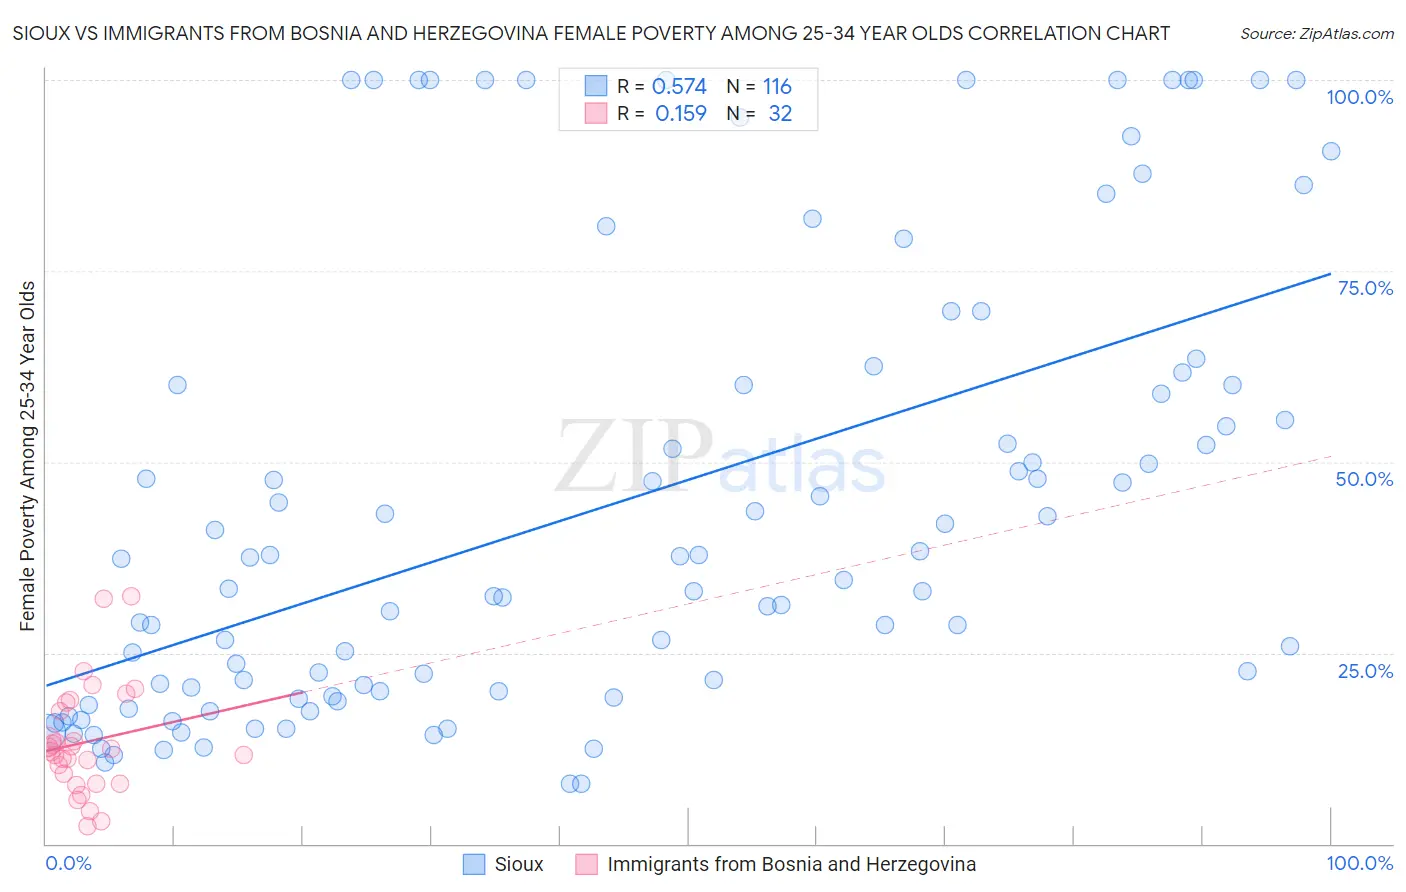 Sioux vs Immigrants from Bosnia and Herzegovina Female Poverty Among 25-34 Year Olds